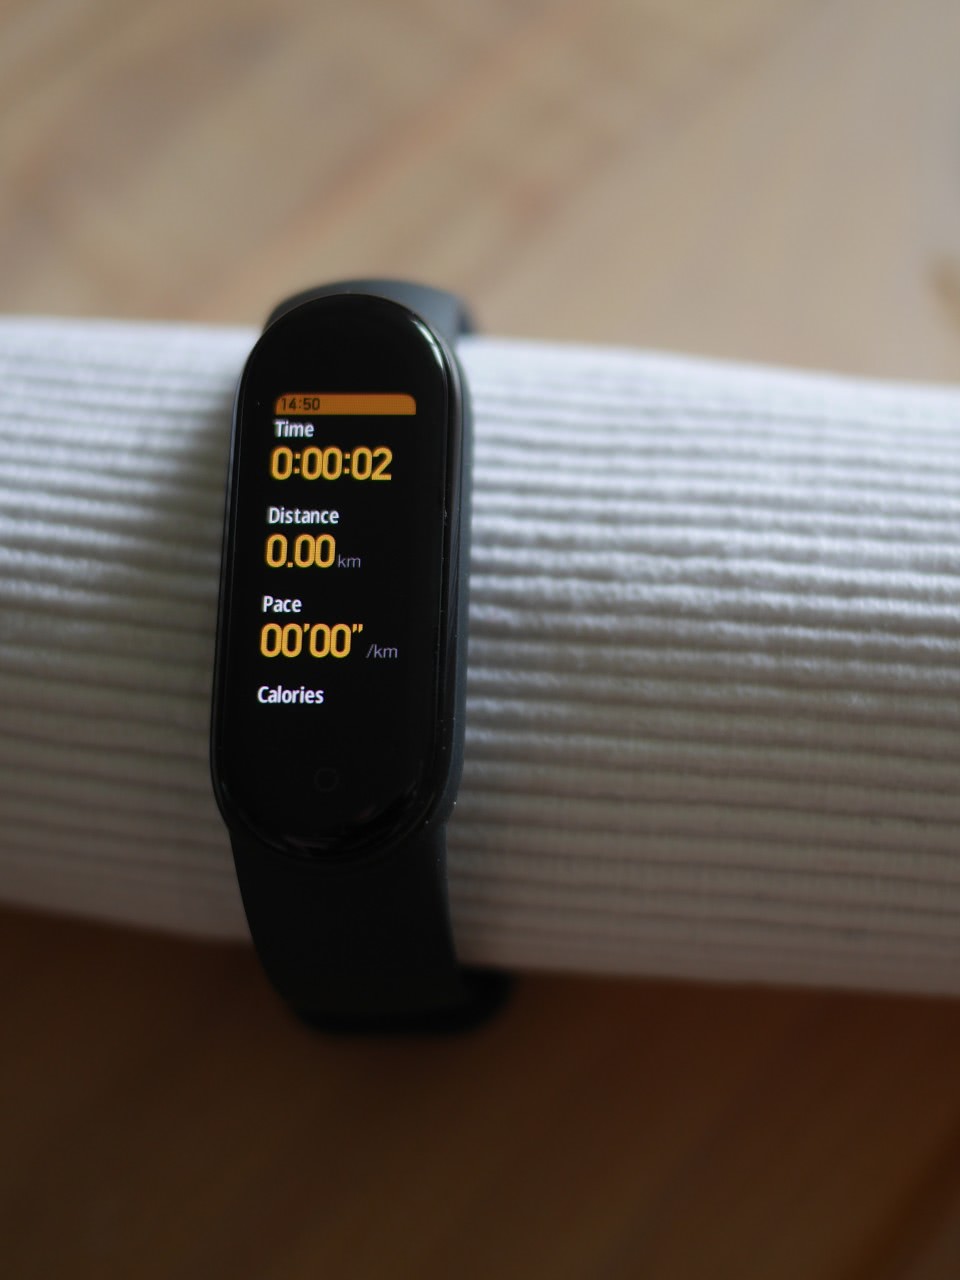 How the Xiaomi Mi Band has Evolved Over the Years 2014-2020 